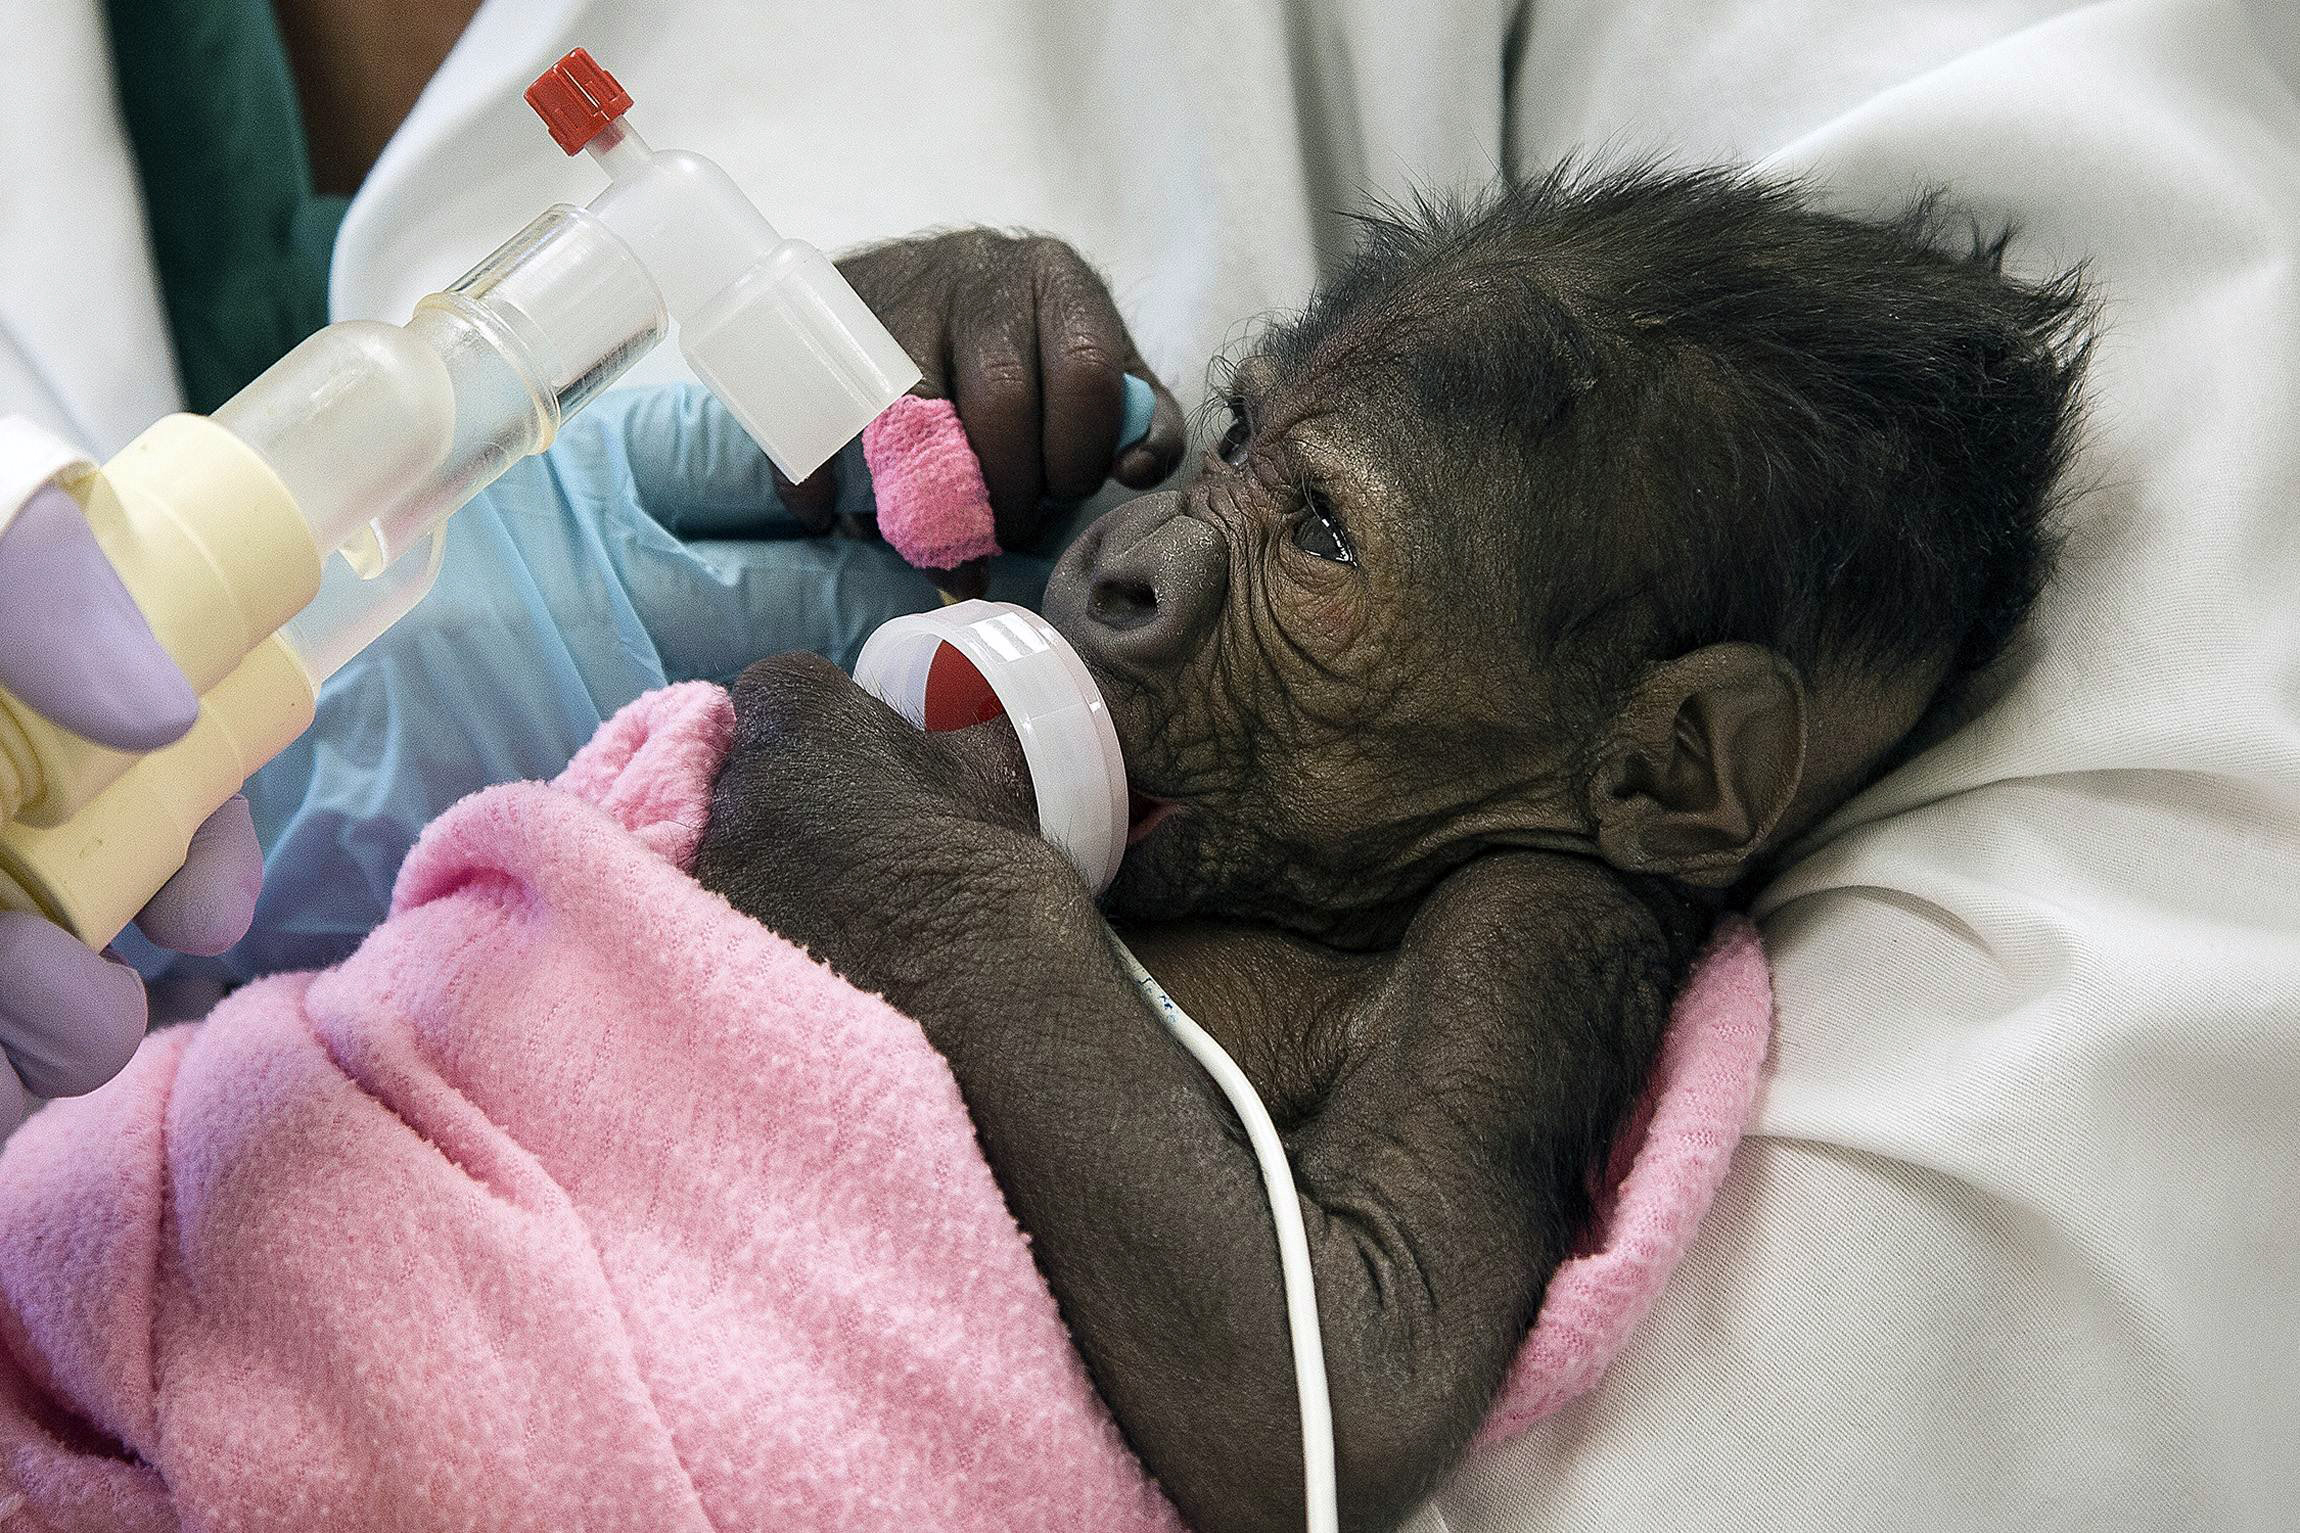 A baby gorilla born in a rare Caesarian section at the San Diego Zoo is suffering from pneumonia March 13, 2014.